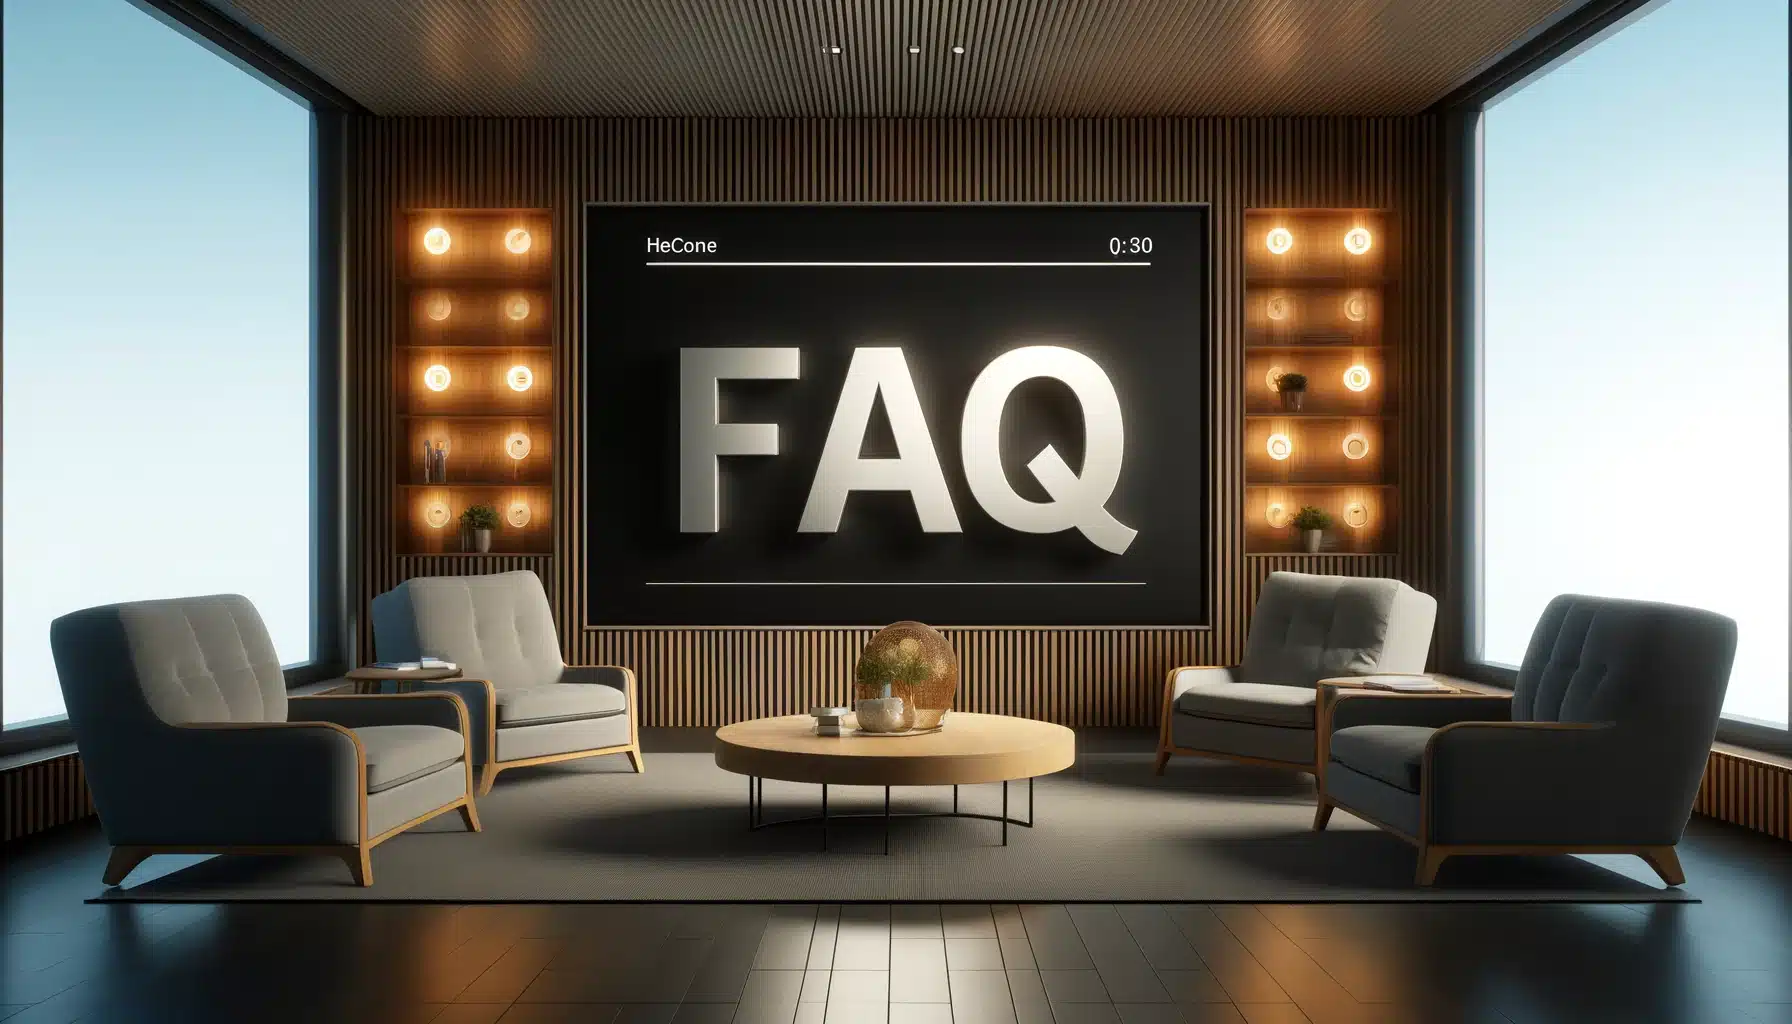 A modern media room with a large media wall displaying the word 'FAQ', comfortable seating, and ambient lighting.